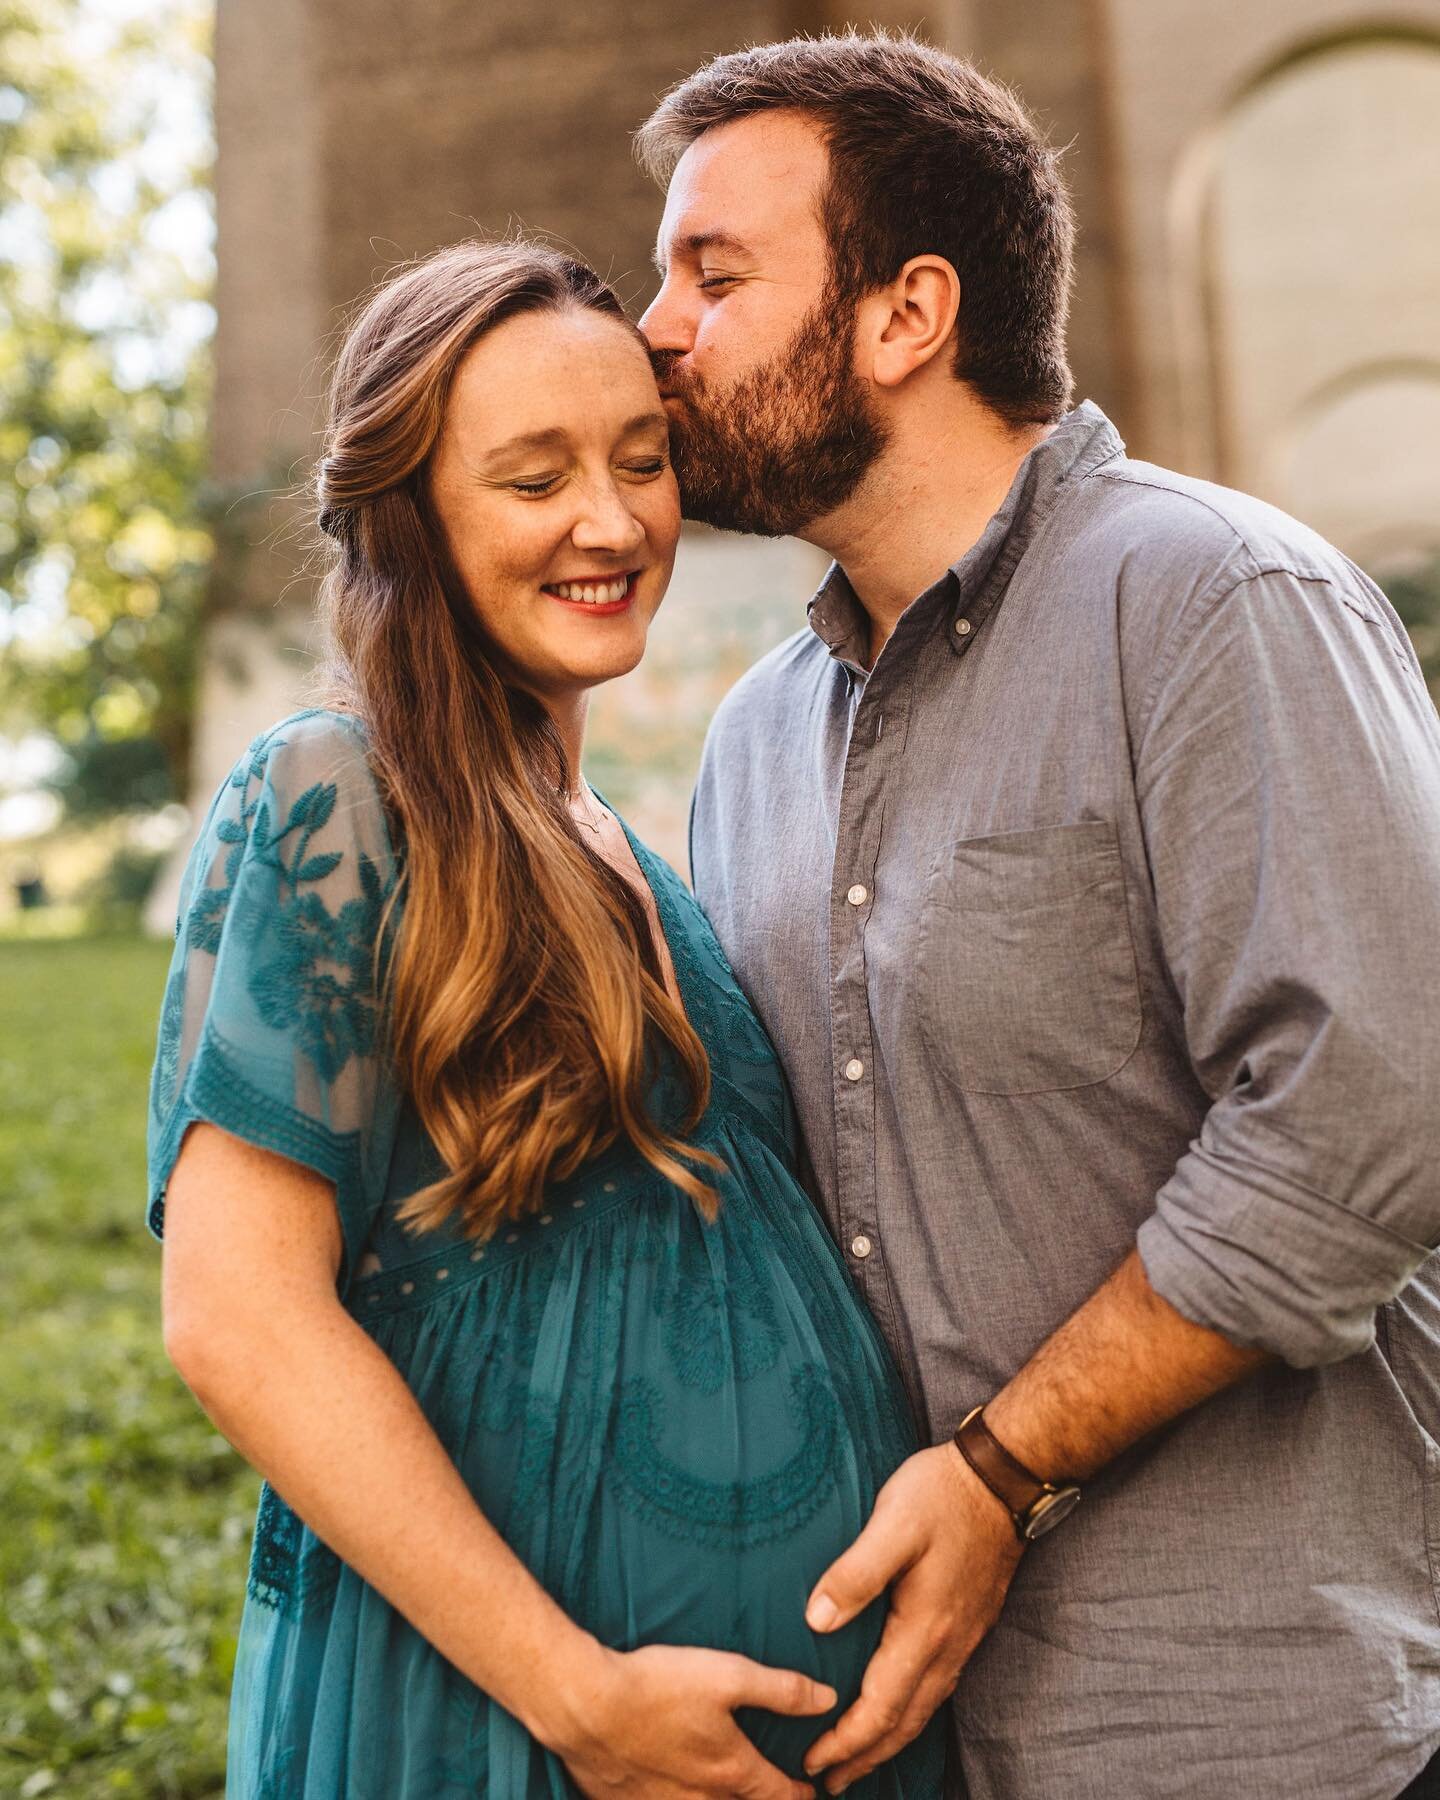 The cutest maternity photos in Astoria Park! Thank you Joe and Dawn for including me on this lovely memory.